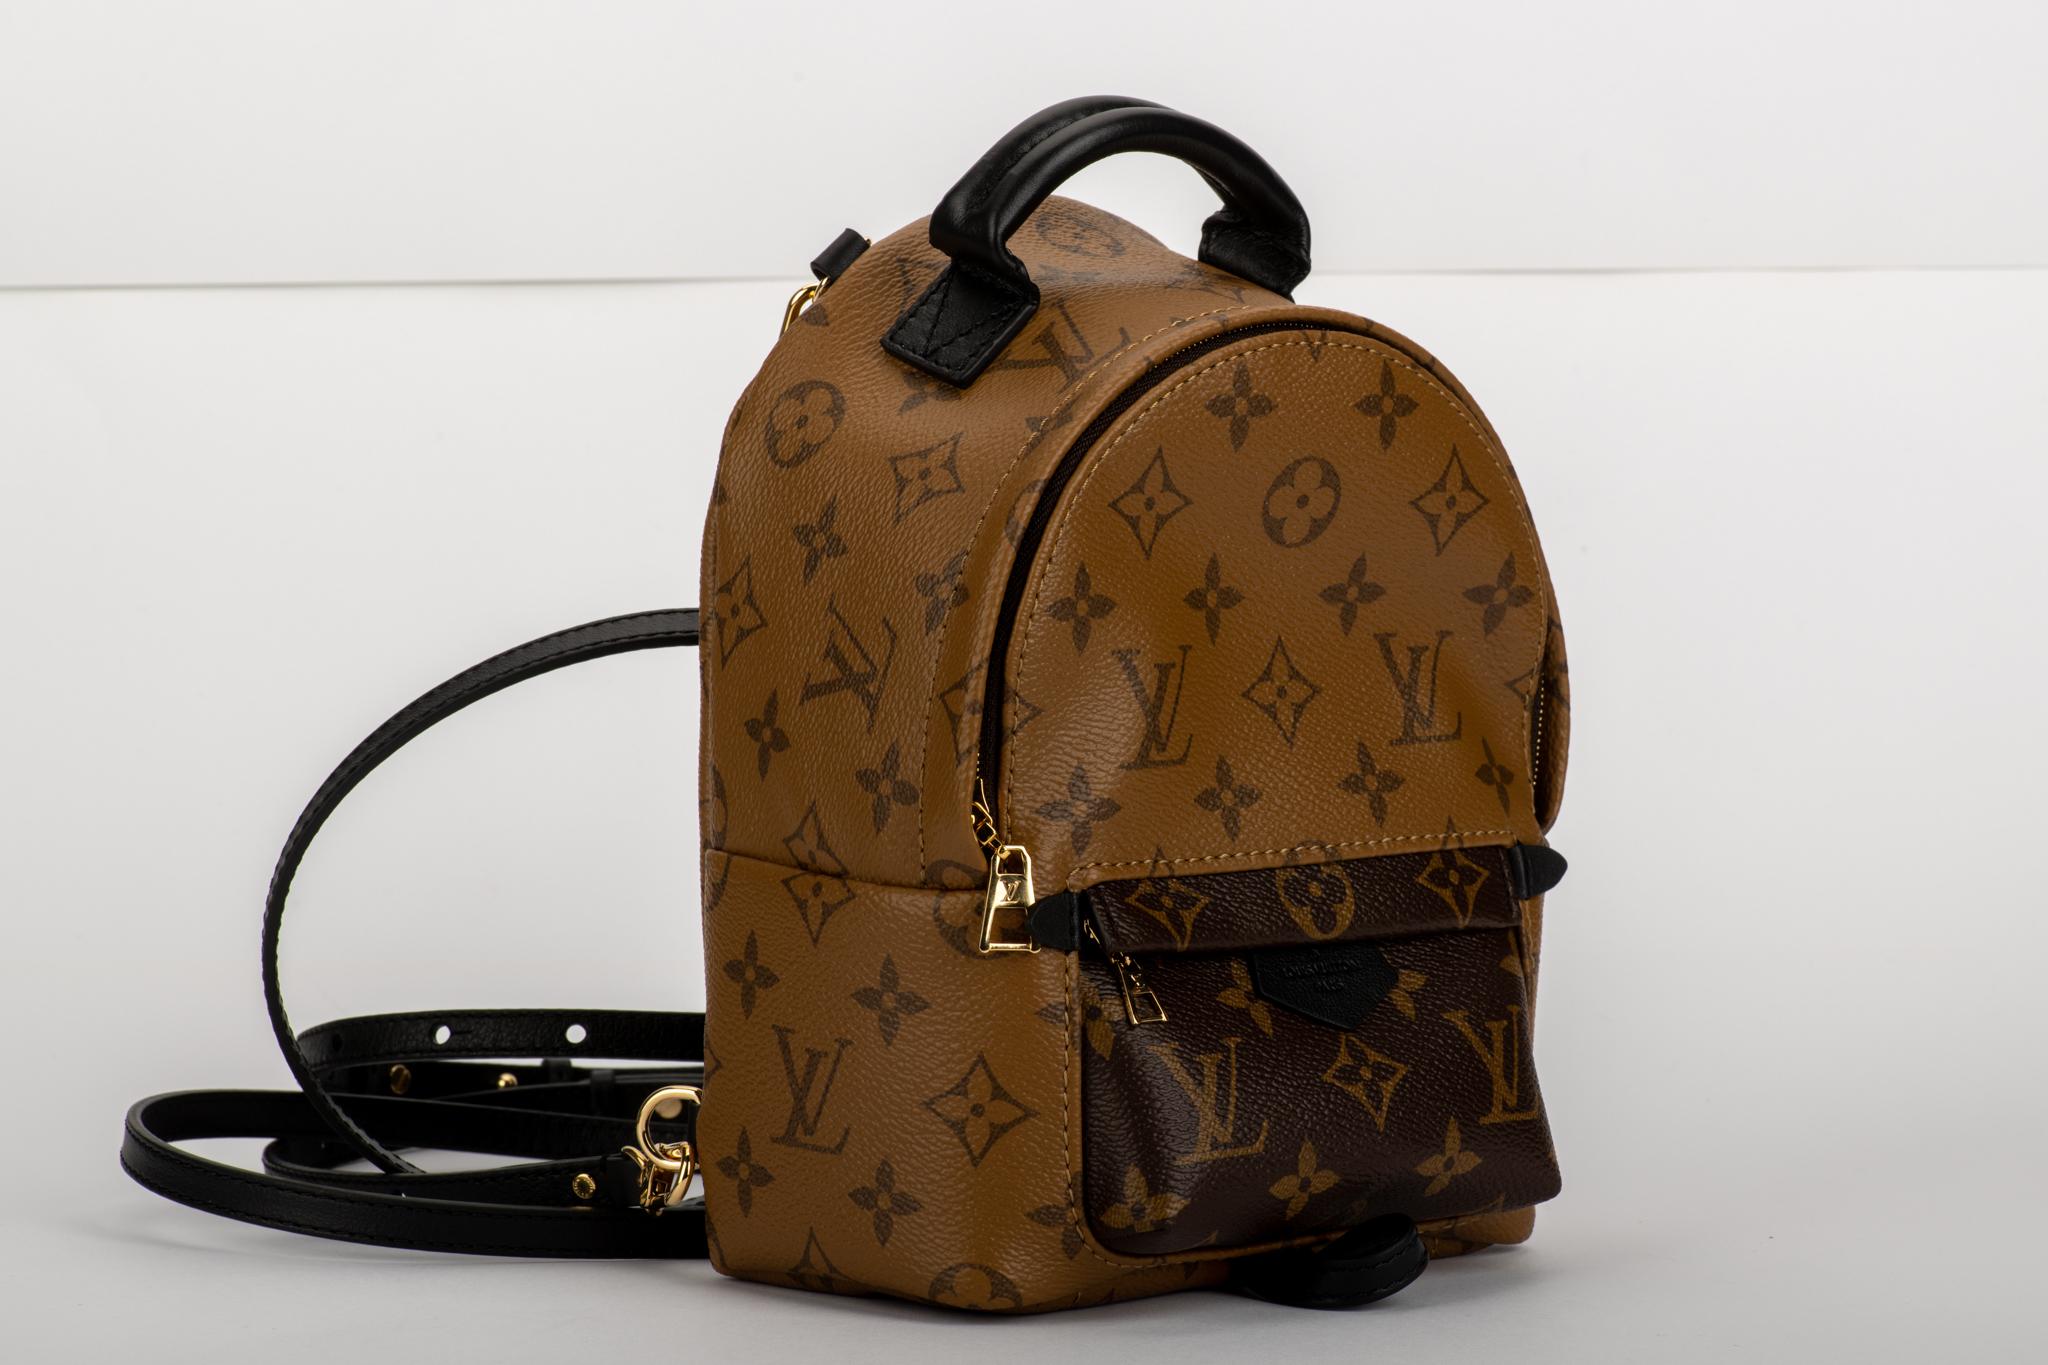 A new take on a very classic staple of the Louis Vuitton collection. The mini monogram canvas sports a multi-positional strap for cross-body wear. Brand new in box with booklet, dust cover, box, ribbon and shopping bag.